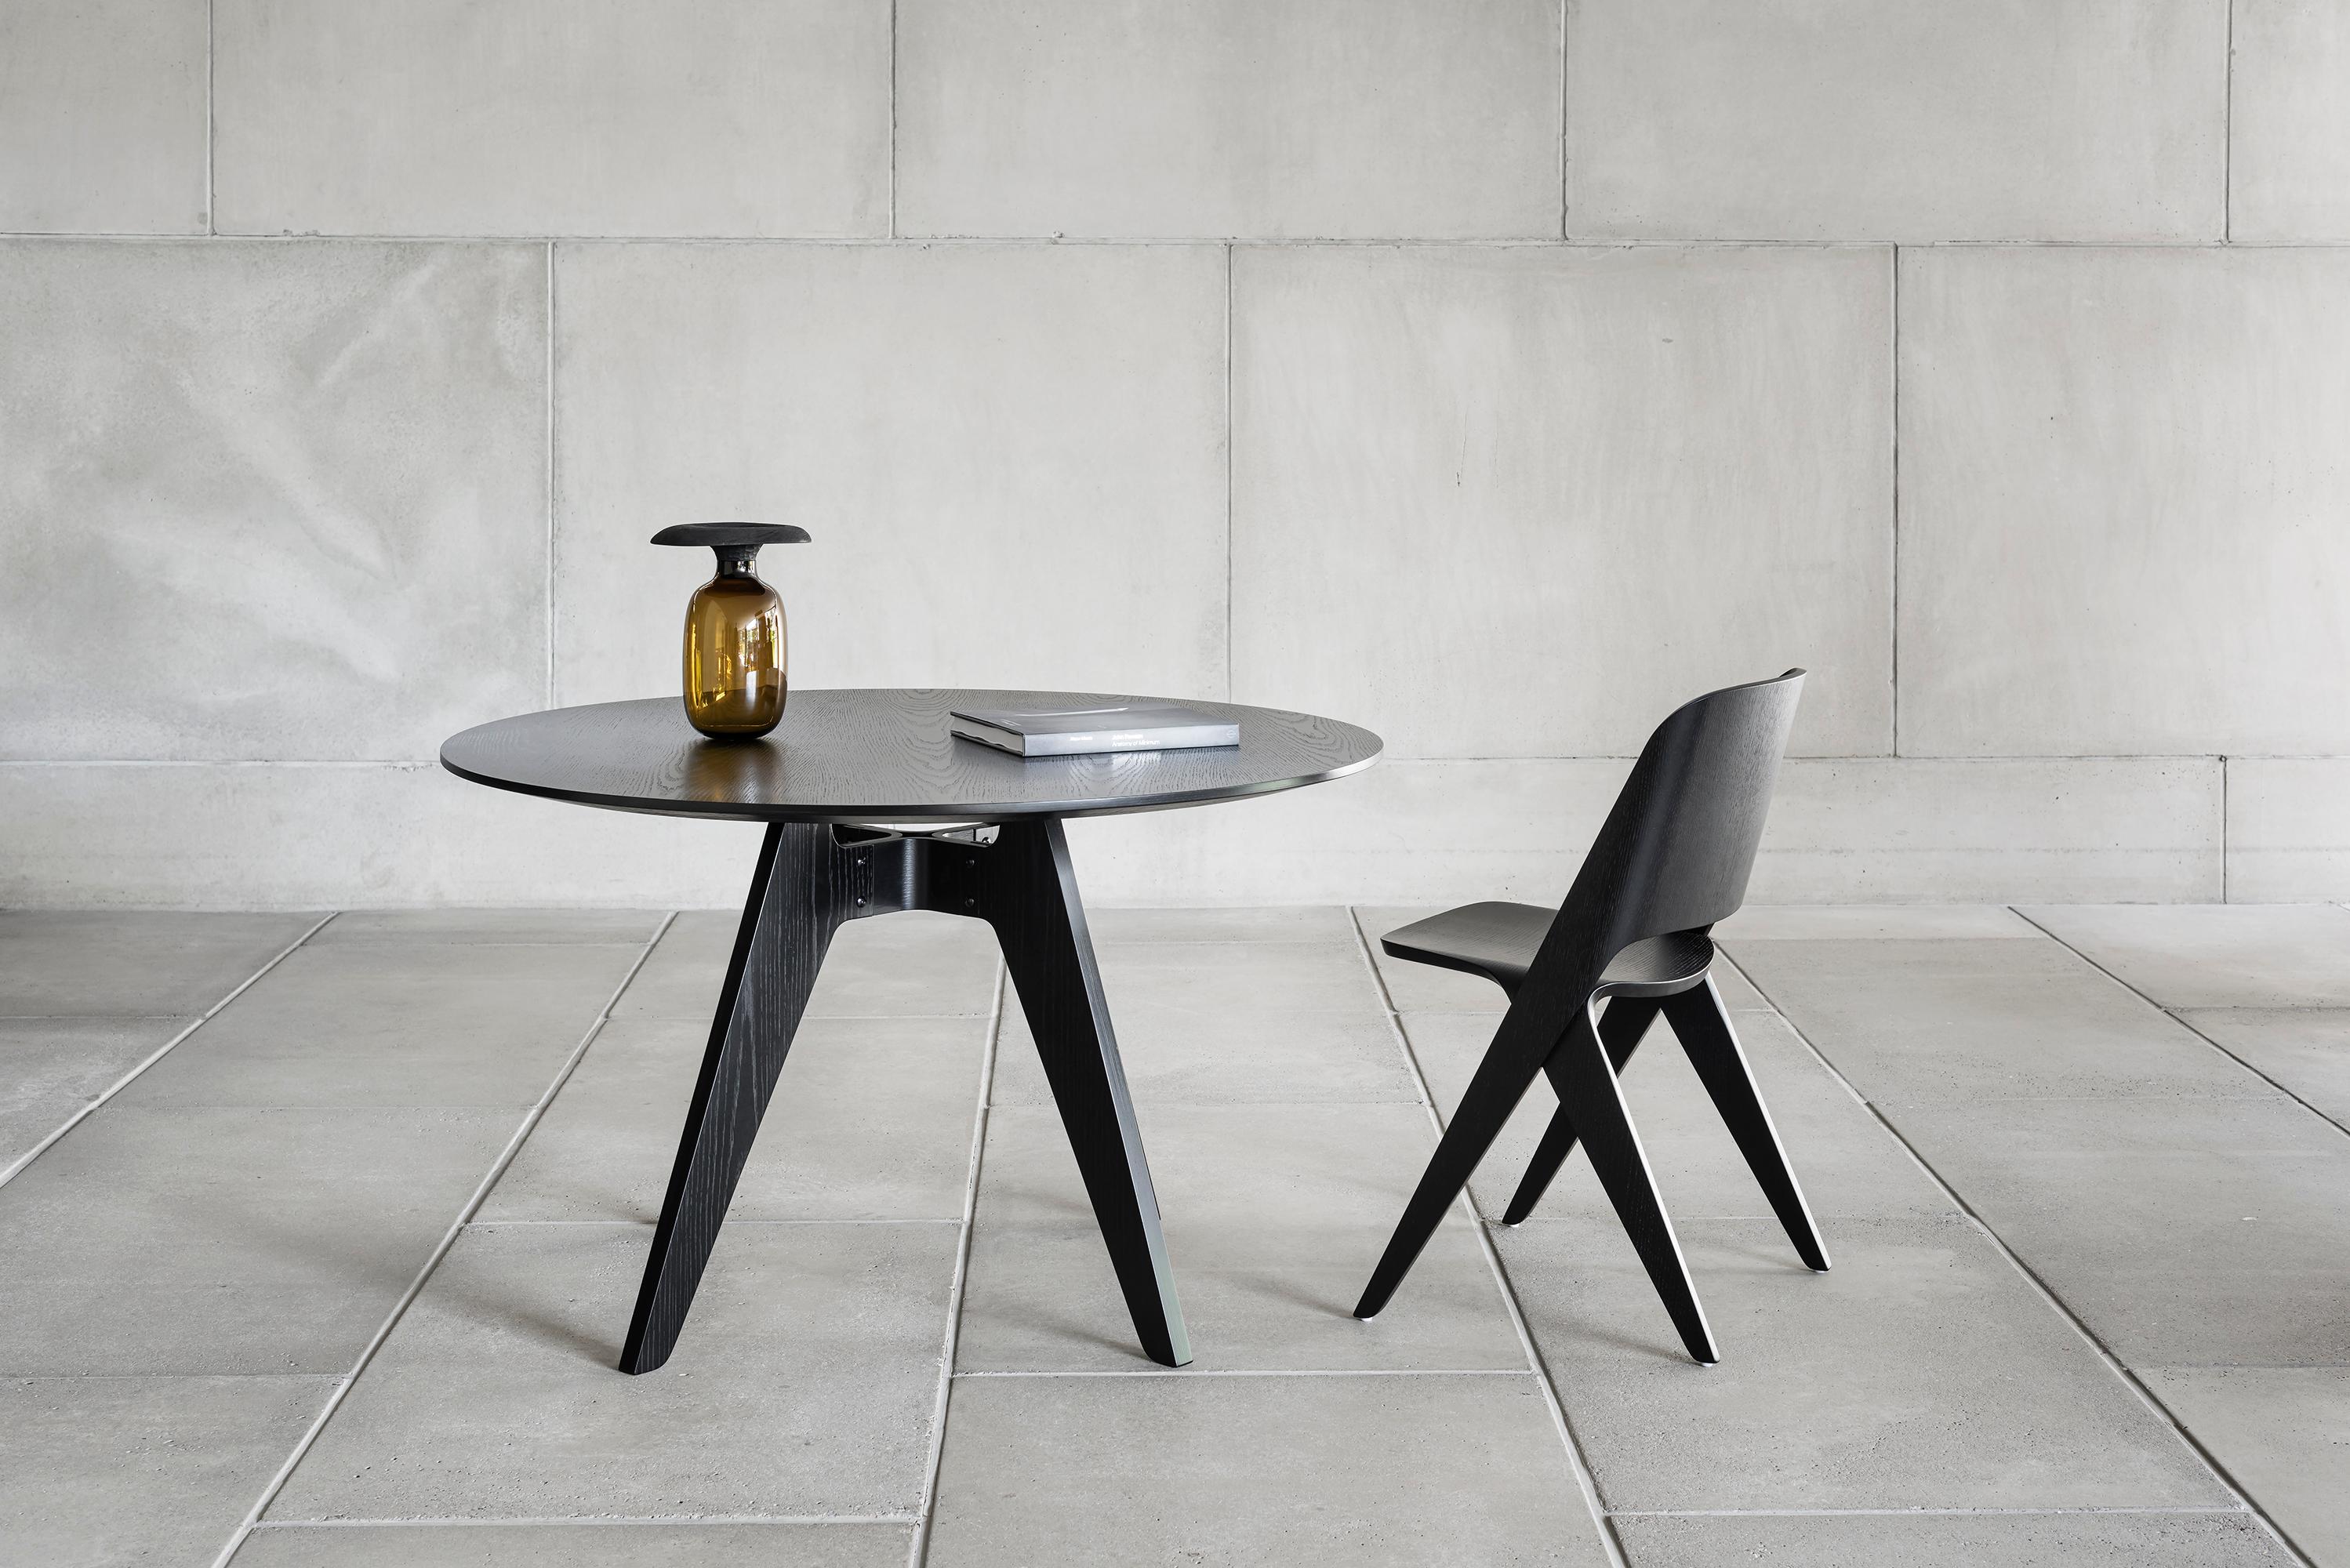 Lavitta round table (120 cm) designed by Timo Mikkonen & Antti Rouhunkoski
Collection Lavitta 2016 by Poiat 

Model shown on picture
Dimensions : H. 72 cm x D. 120 cm 
Color : Black Oak 
Four legs 

The Lavitta Collection draws upon the